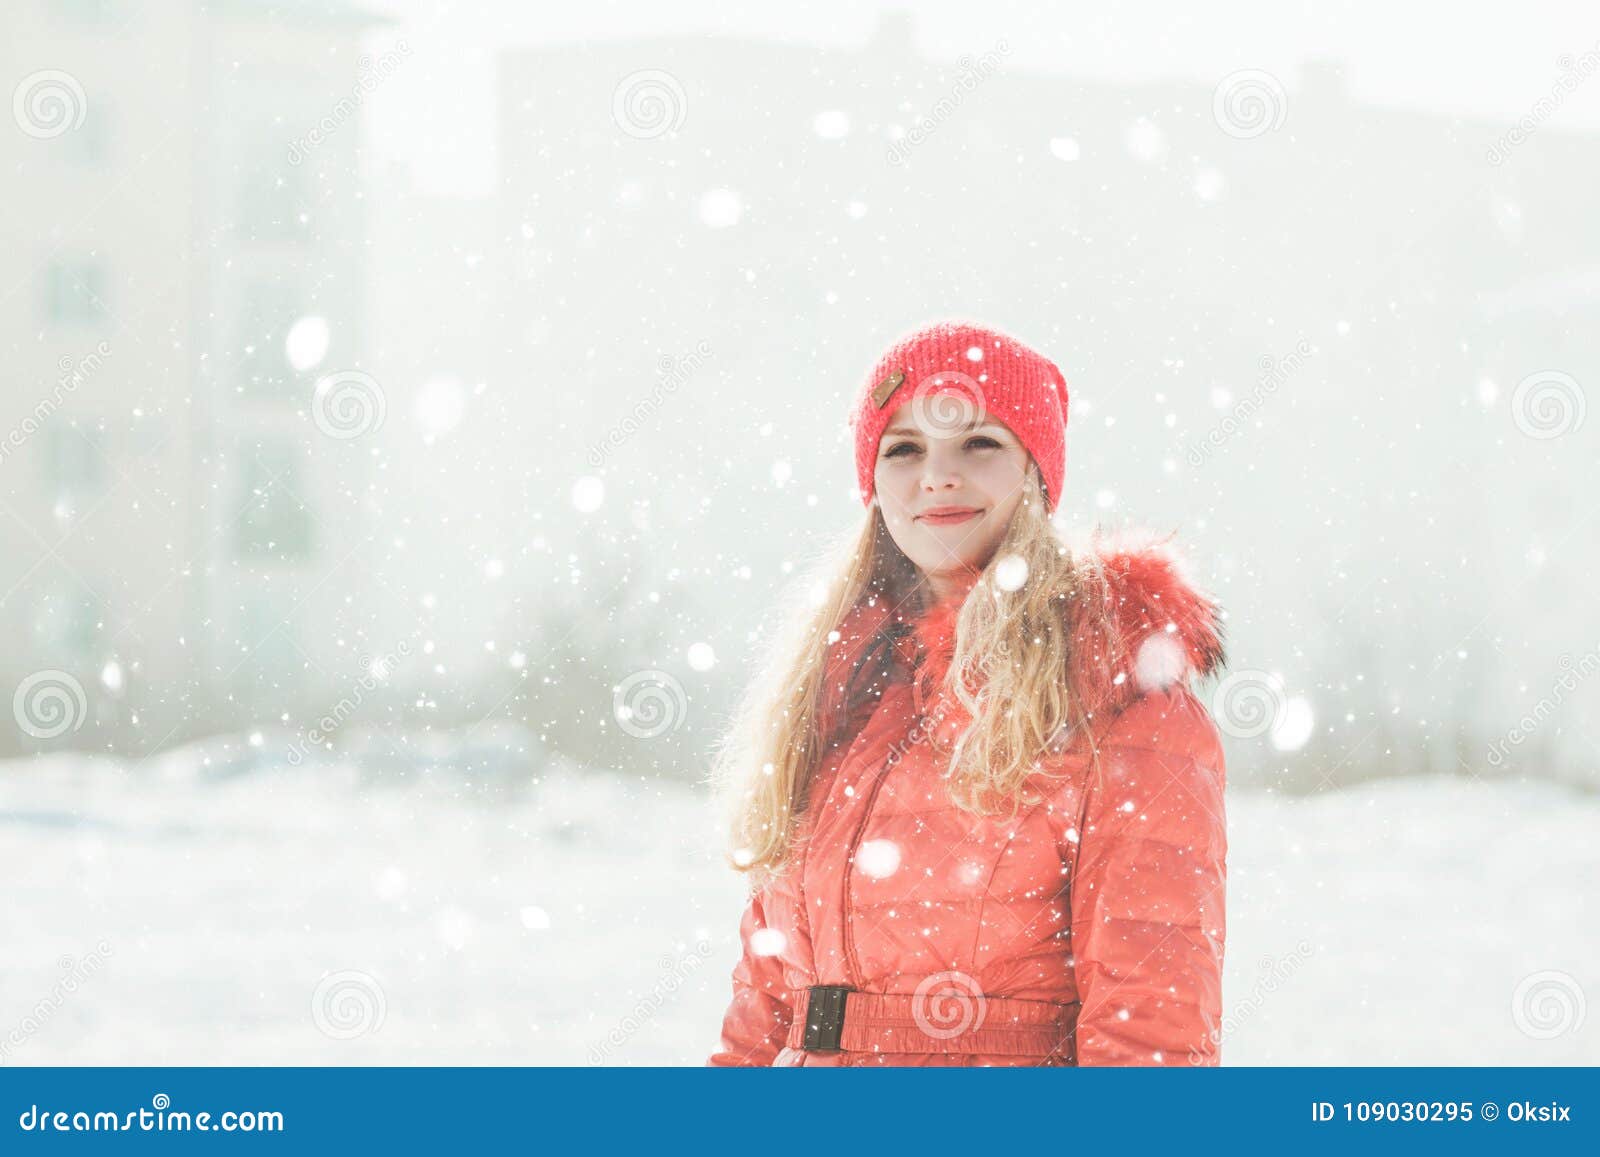 Girl in red parka stock image. Image of parka, cute - 109030295